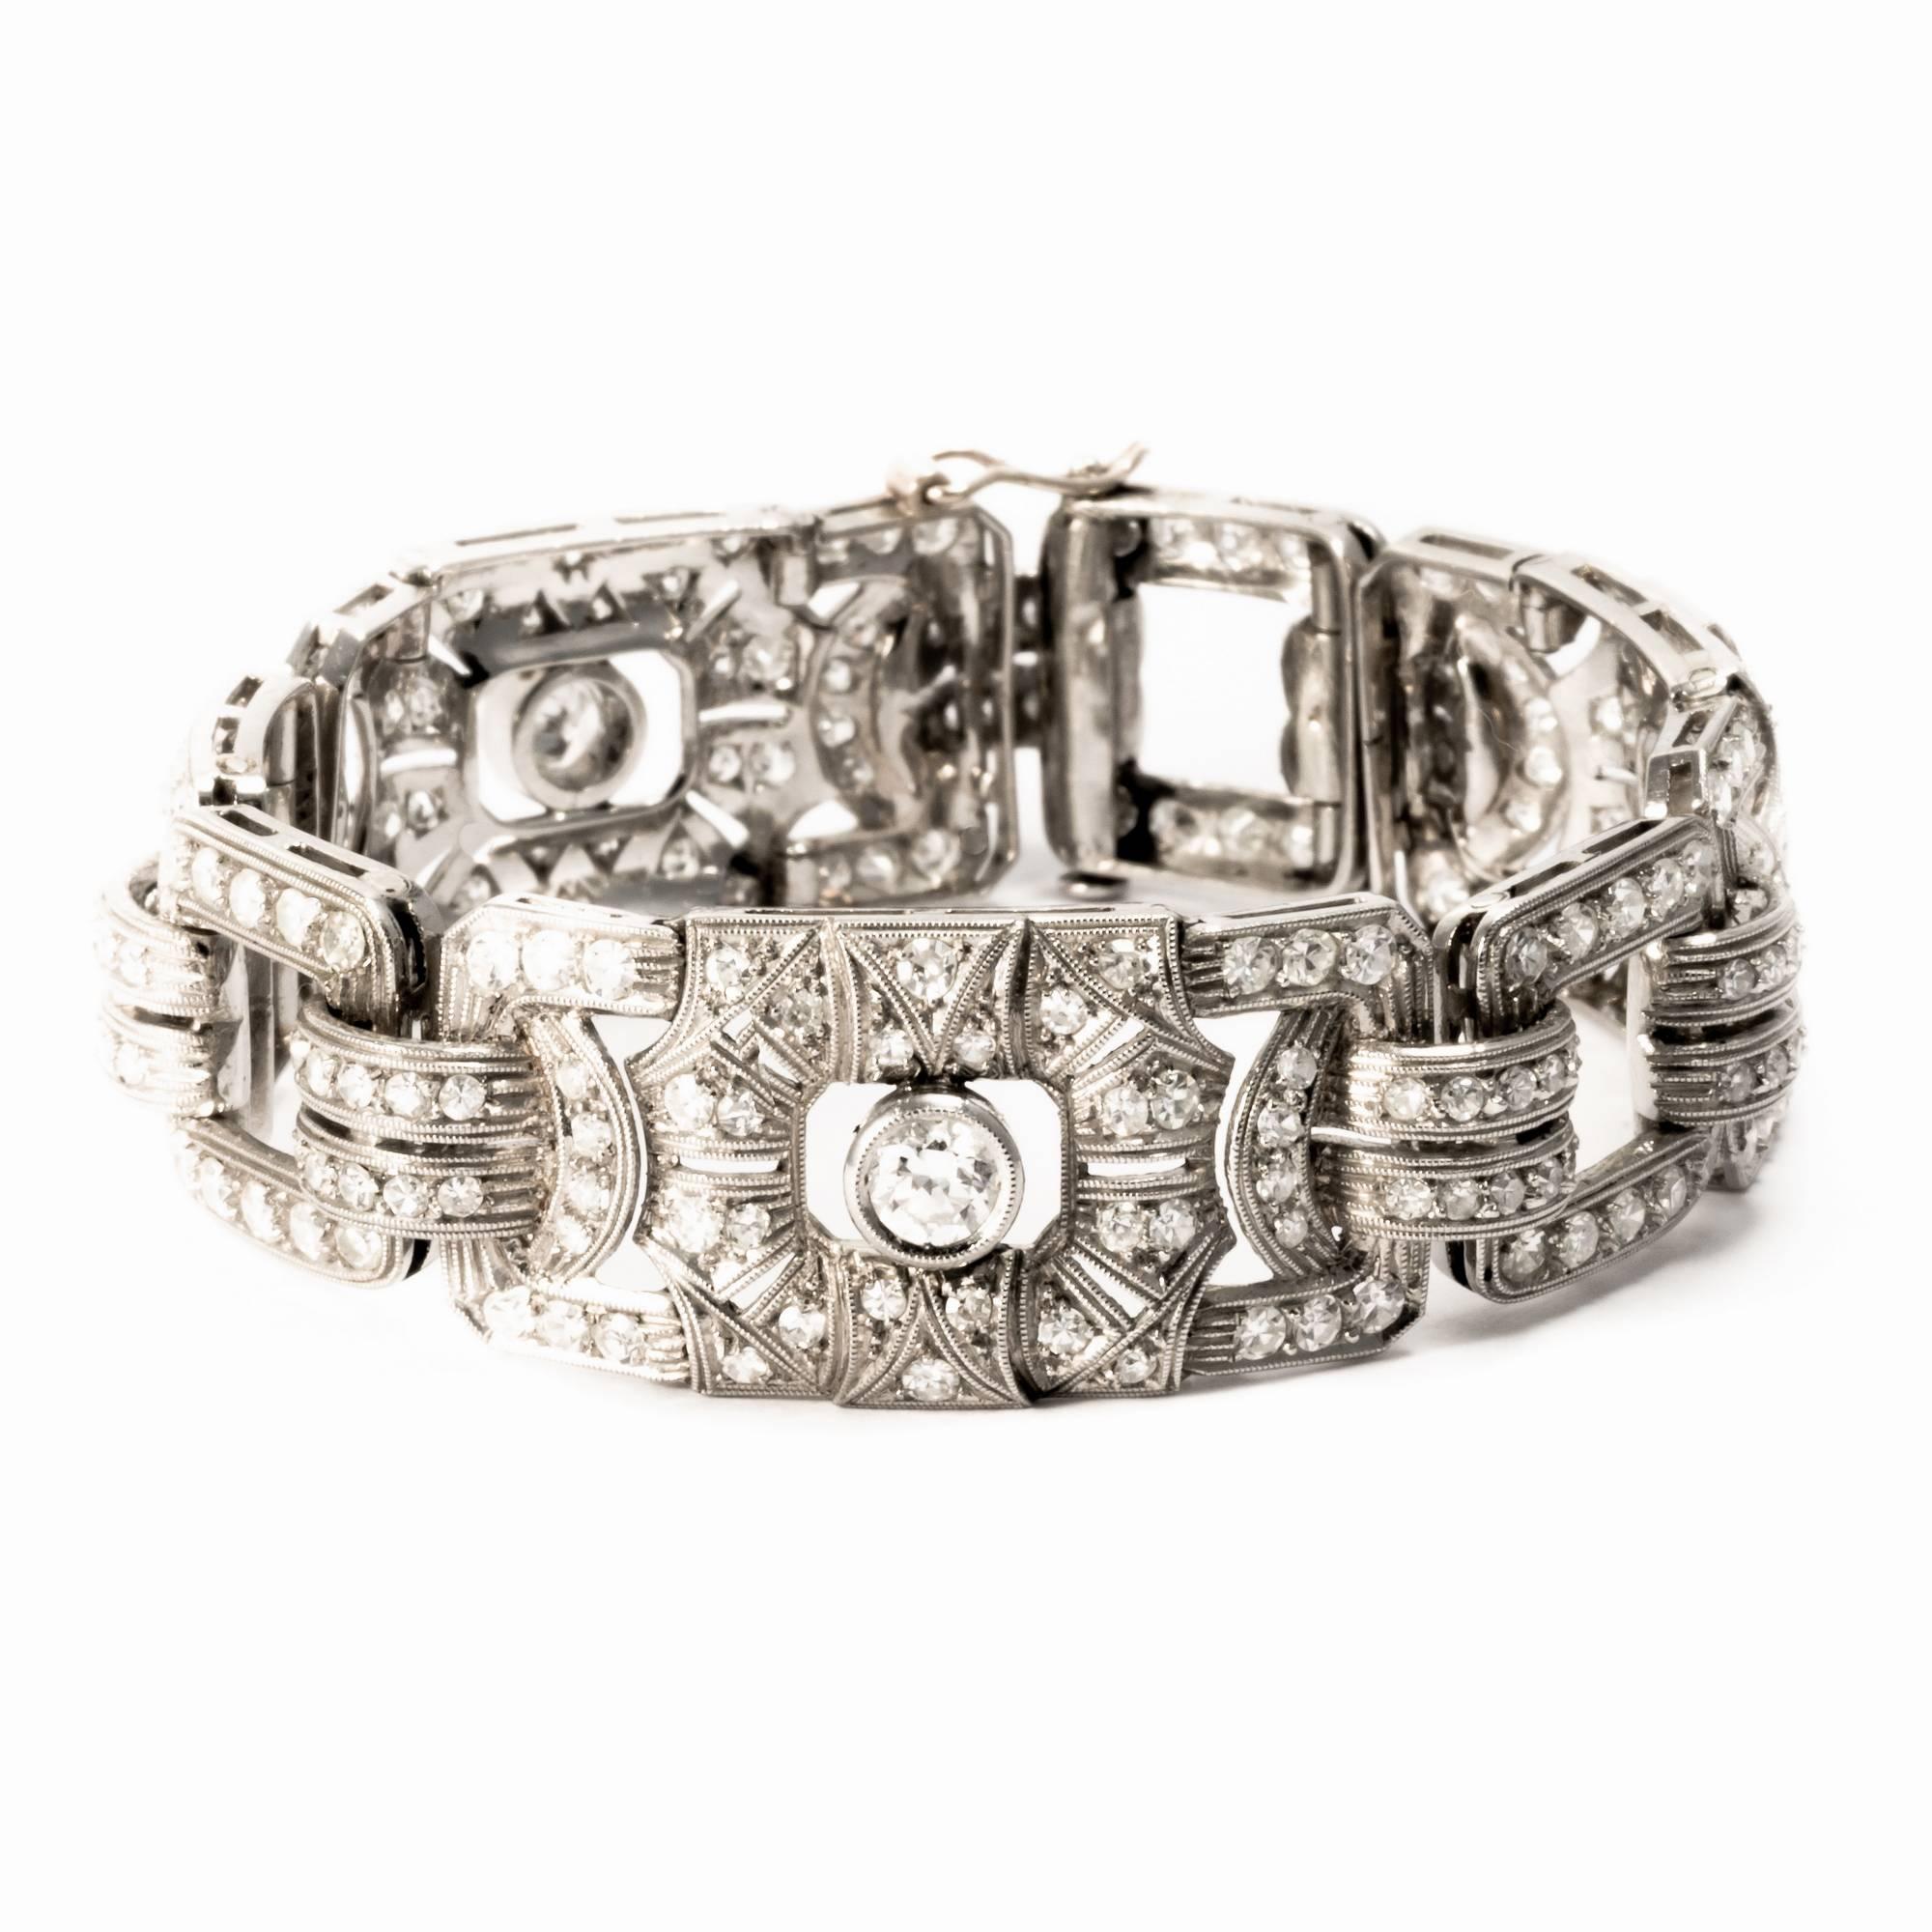 This 1920 art deco link bracelet in white gold shows retcangular  and square elements elegantly linked together. 3 large diamonds (approximately 0.20 carats each) set in a milgrain bezel are enhanced by numerous diamonds in pavé.

Actual bangle